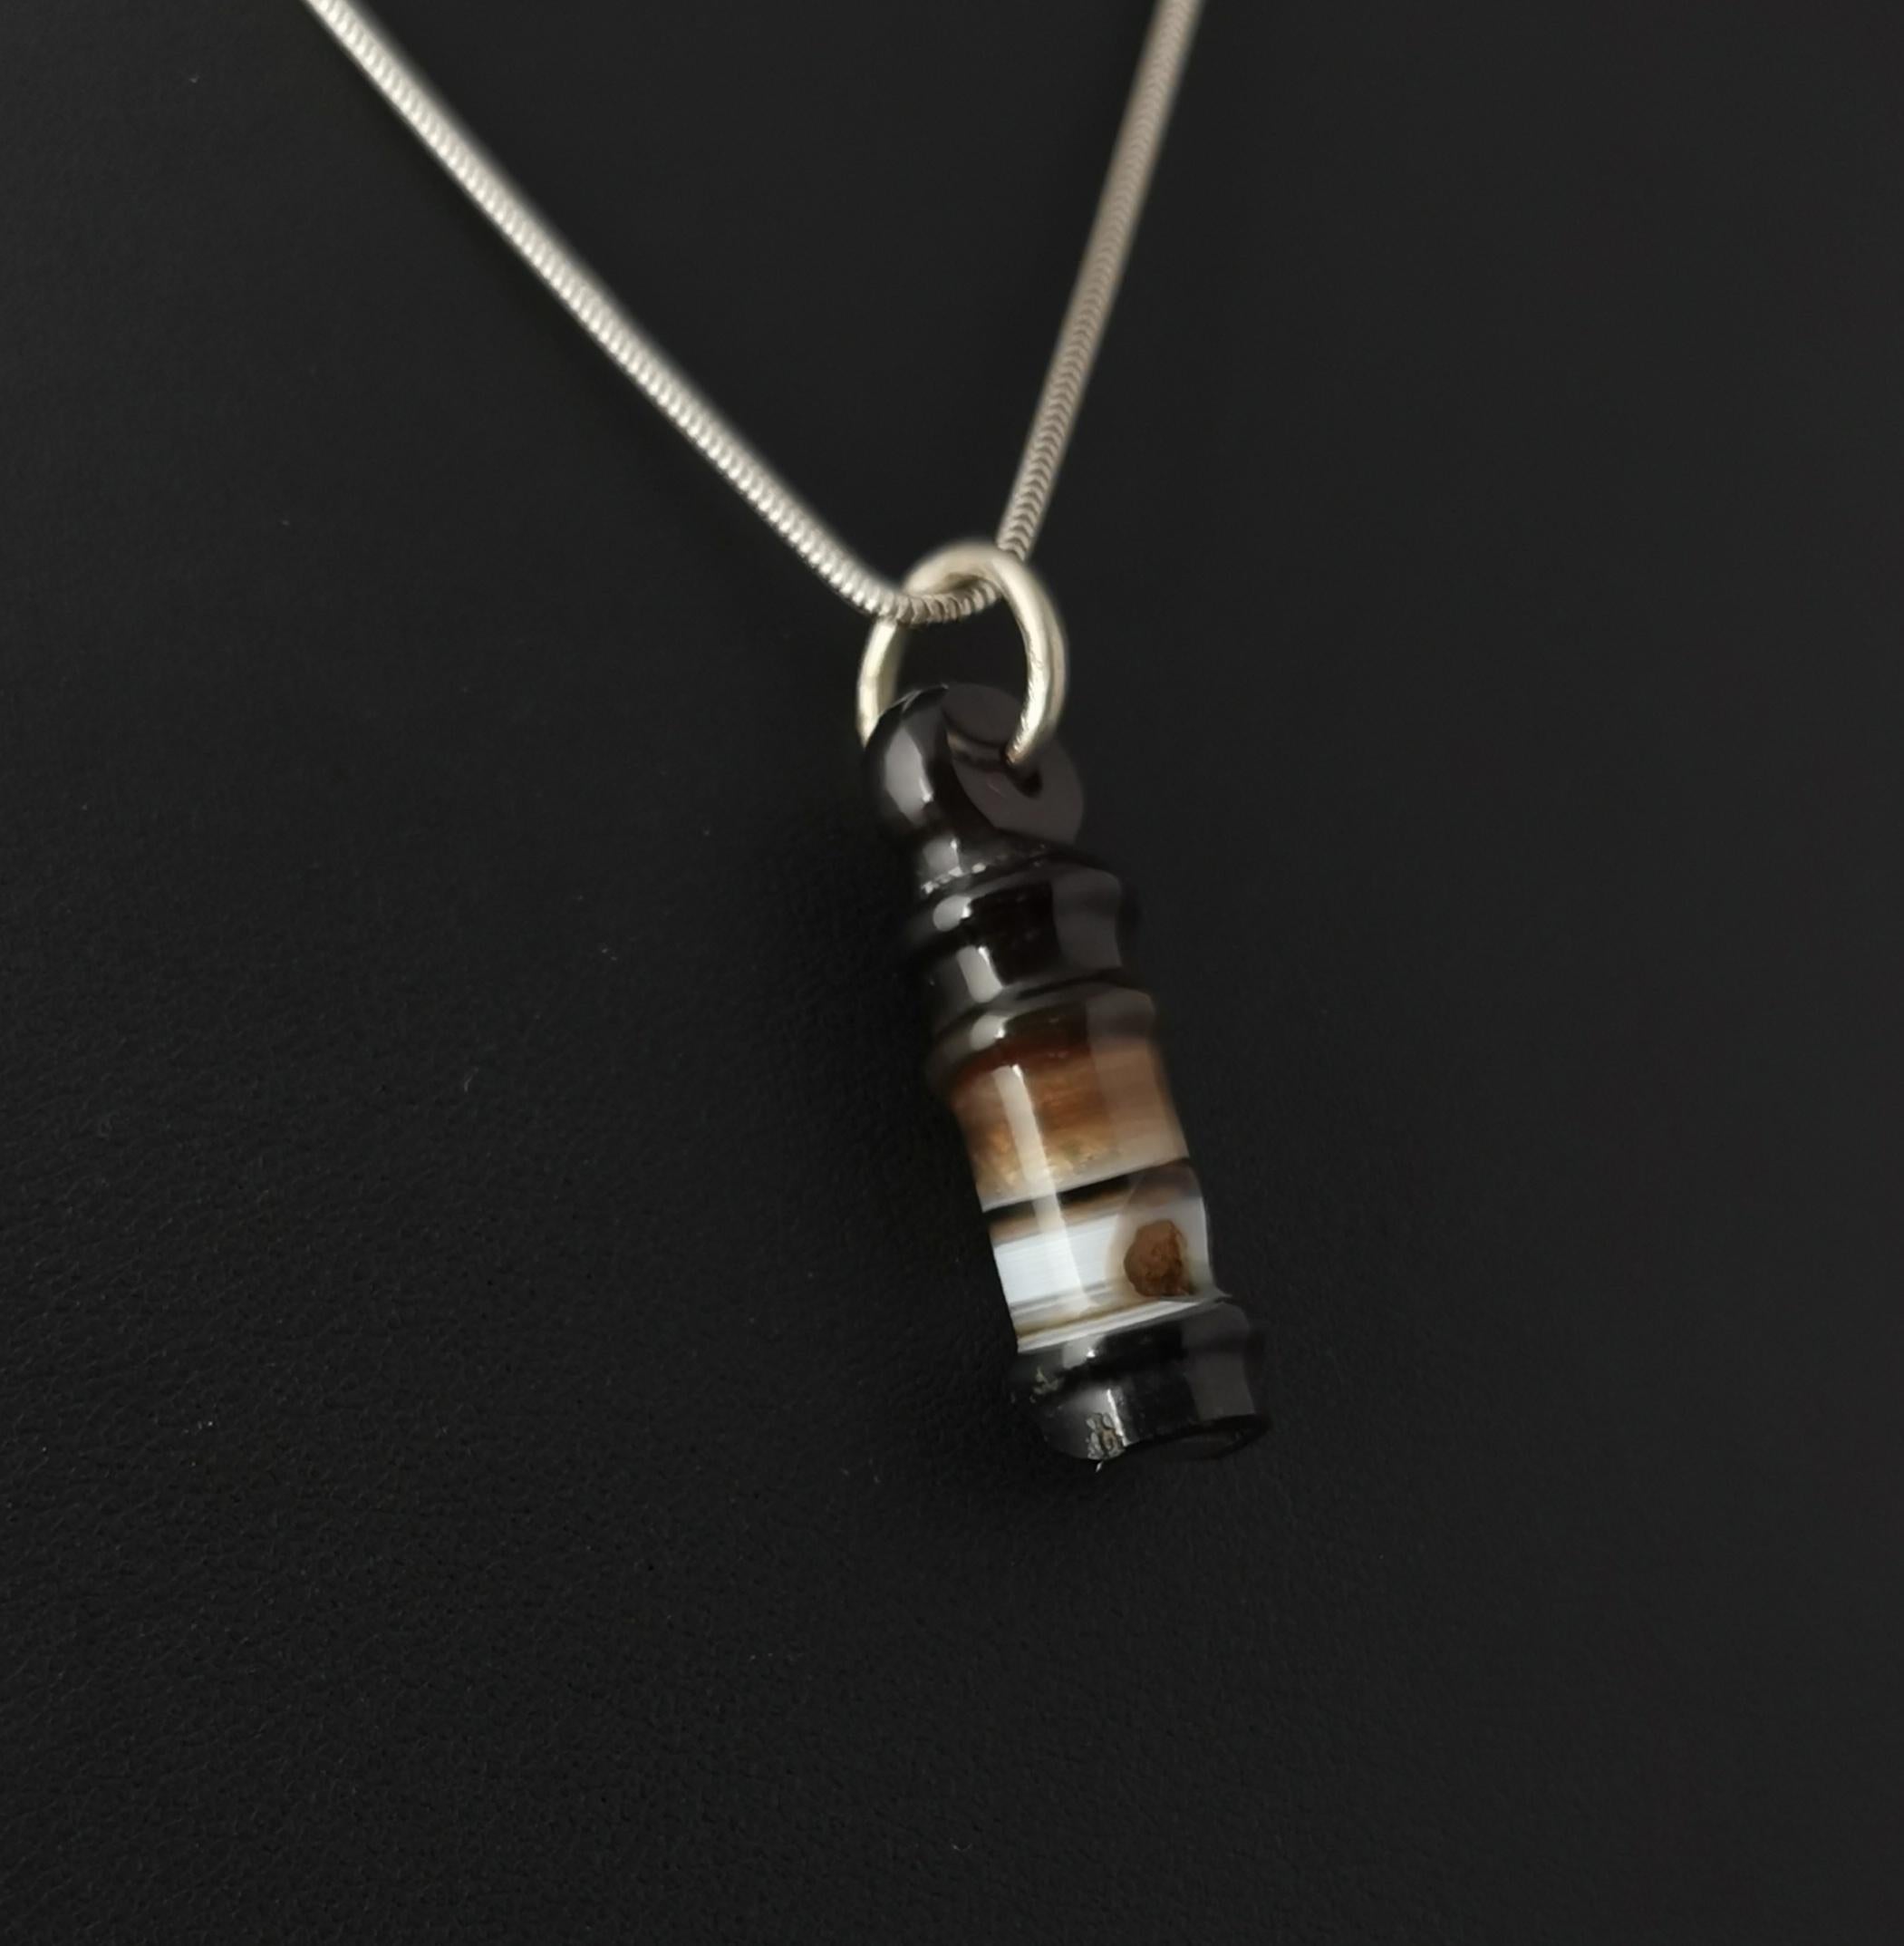 A gorgeous and fun little antique, Victorian era banded agate whistle pendant.

Beautiful banded agate in tones ranging from black to white all hand carved and polished to form a perfect miniature whistle!

The pendant comes on a later sterling